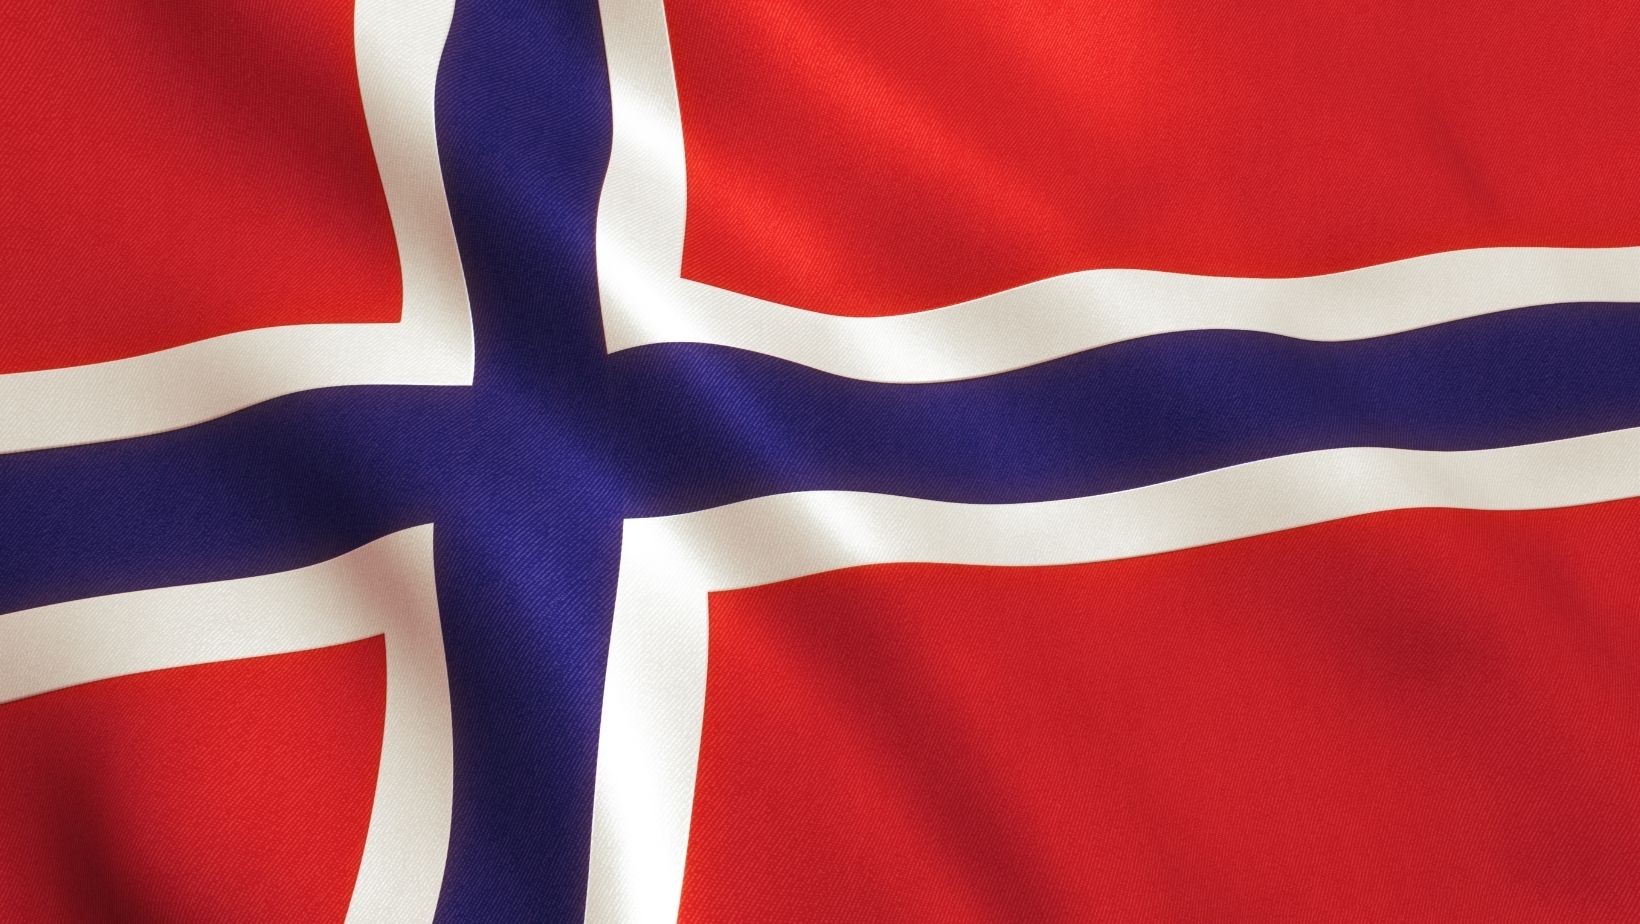 17th May – Norways nationalday